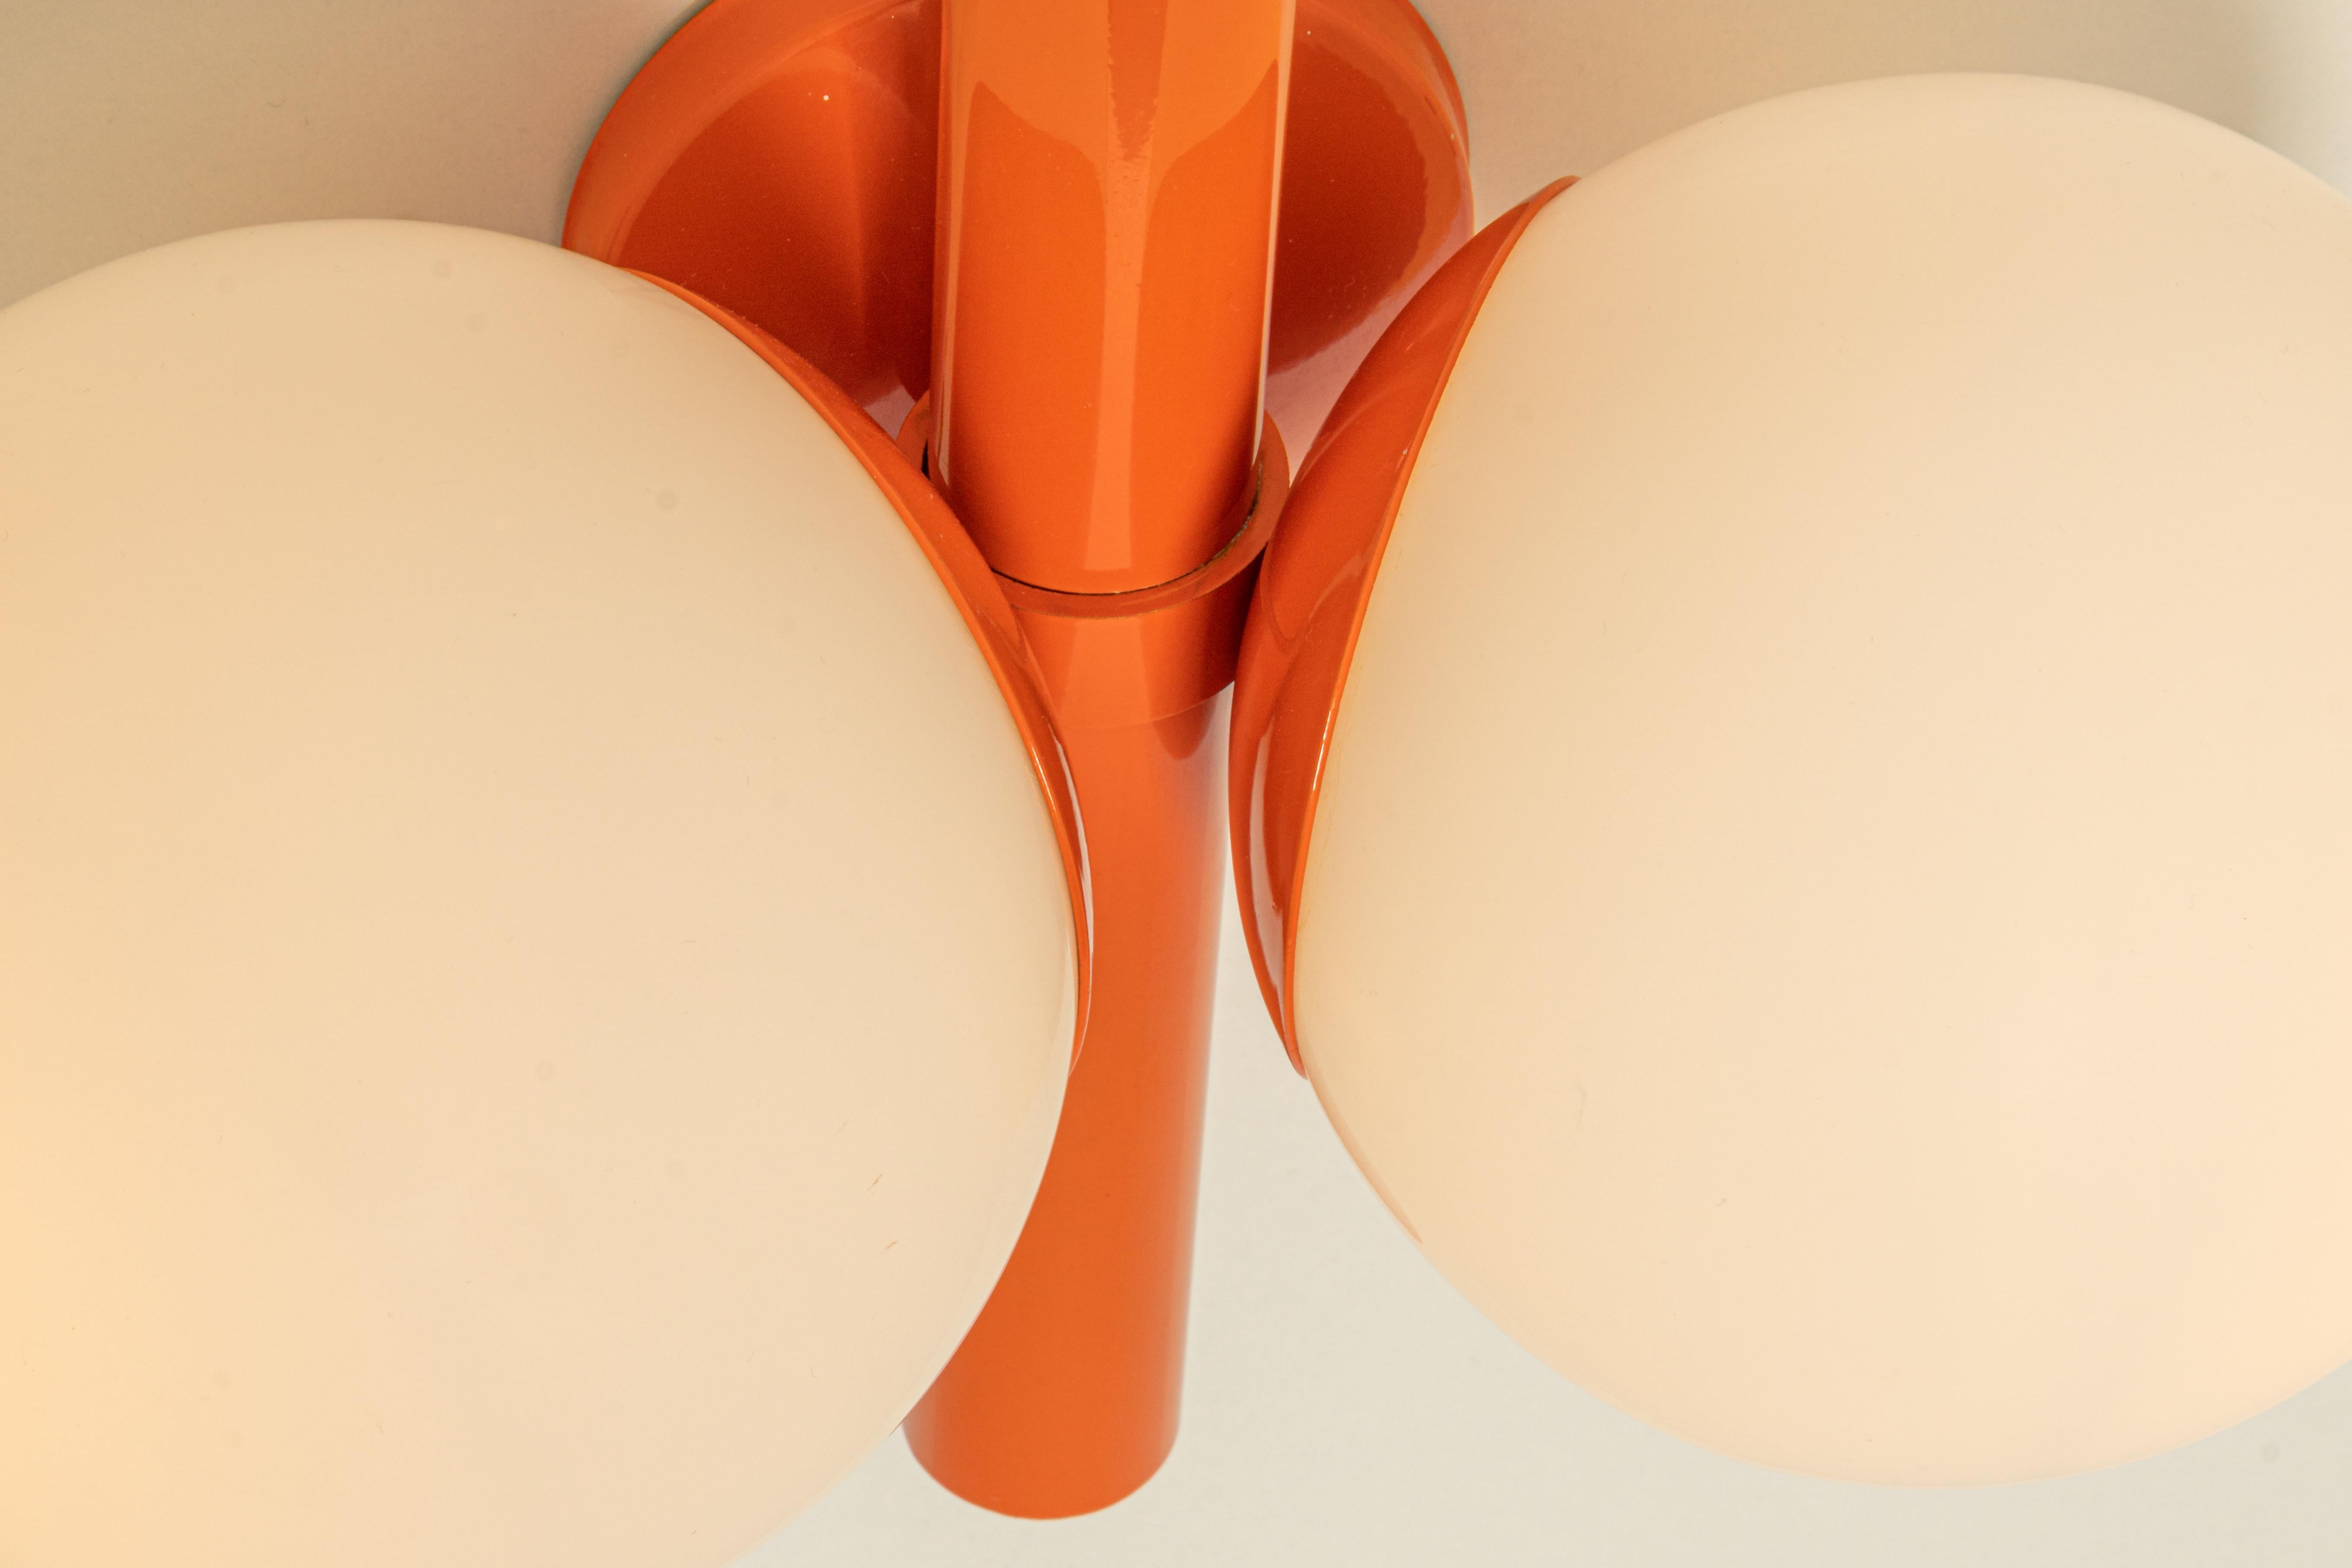 1 of 3 Midcentury Orbital Wall lights in Orange by Kaiser, Germany, 1970s For Sale 2